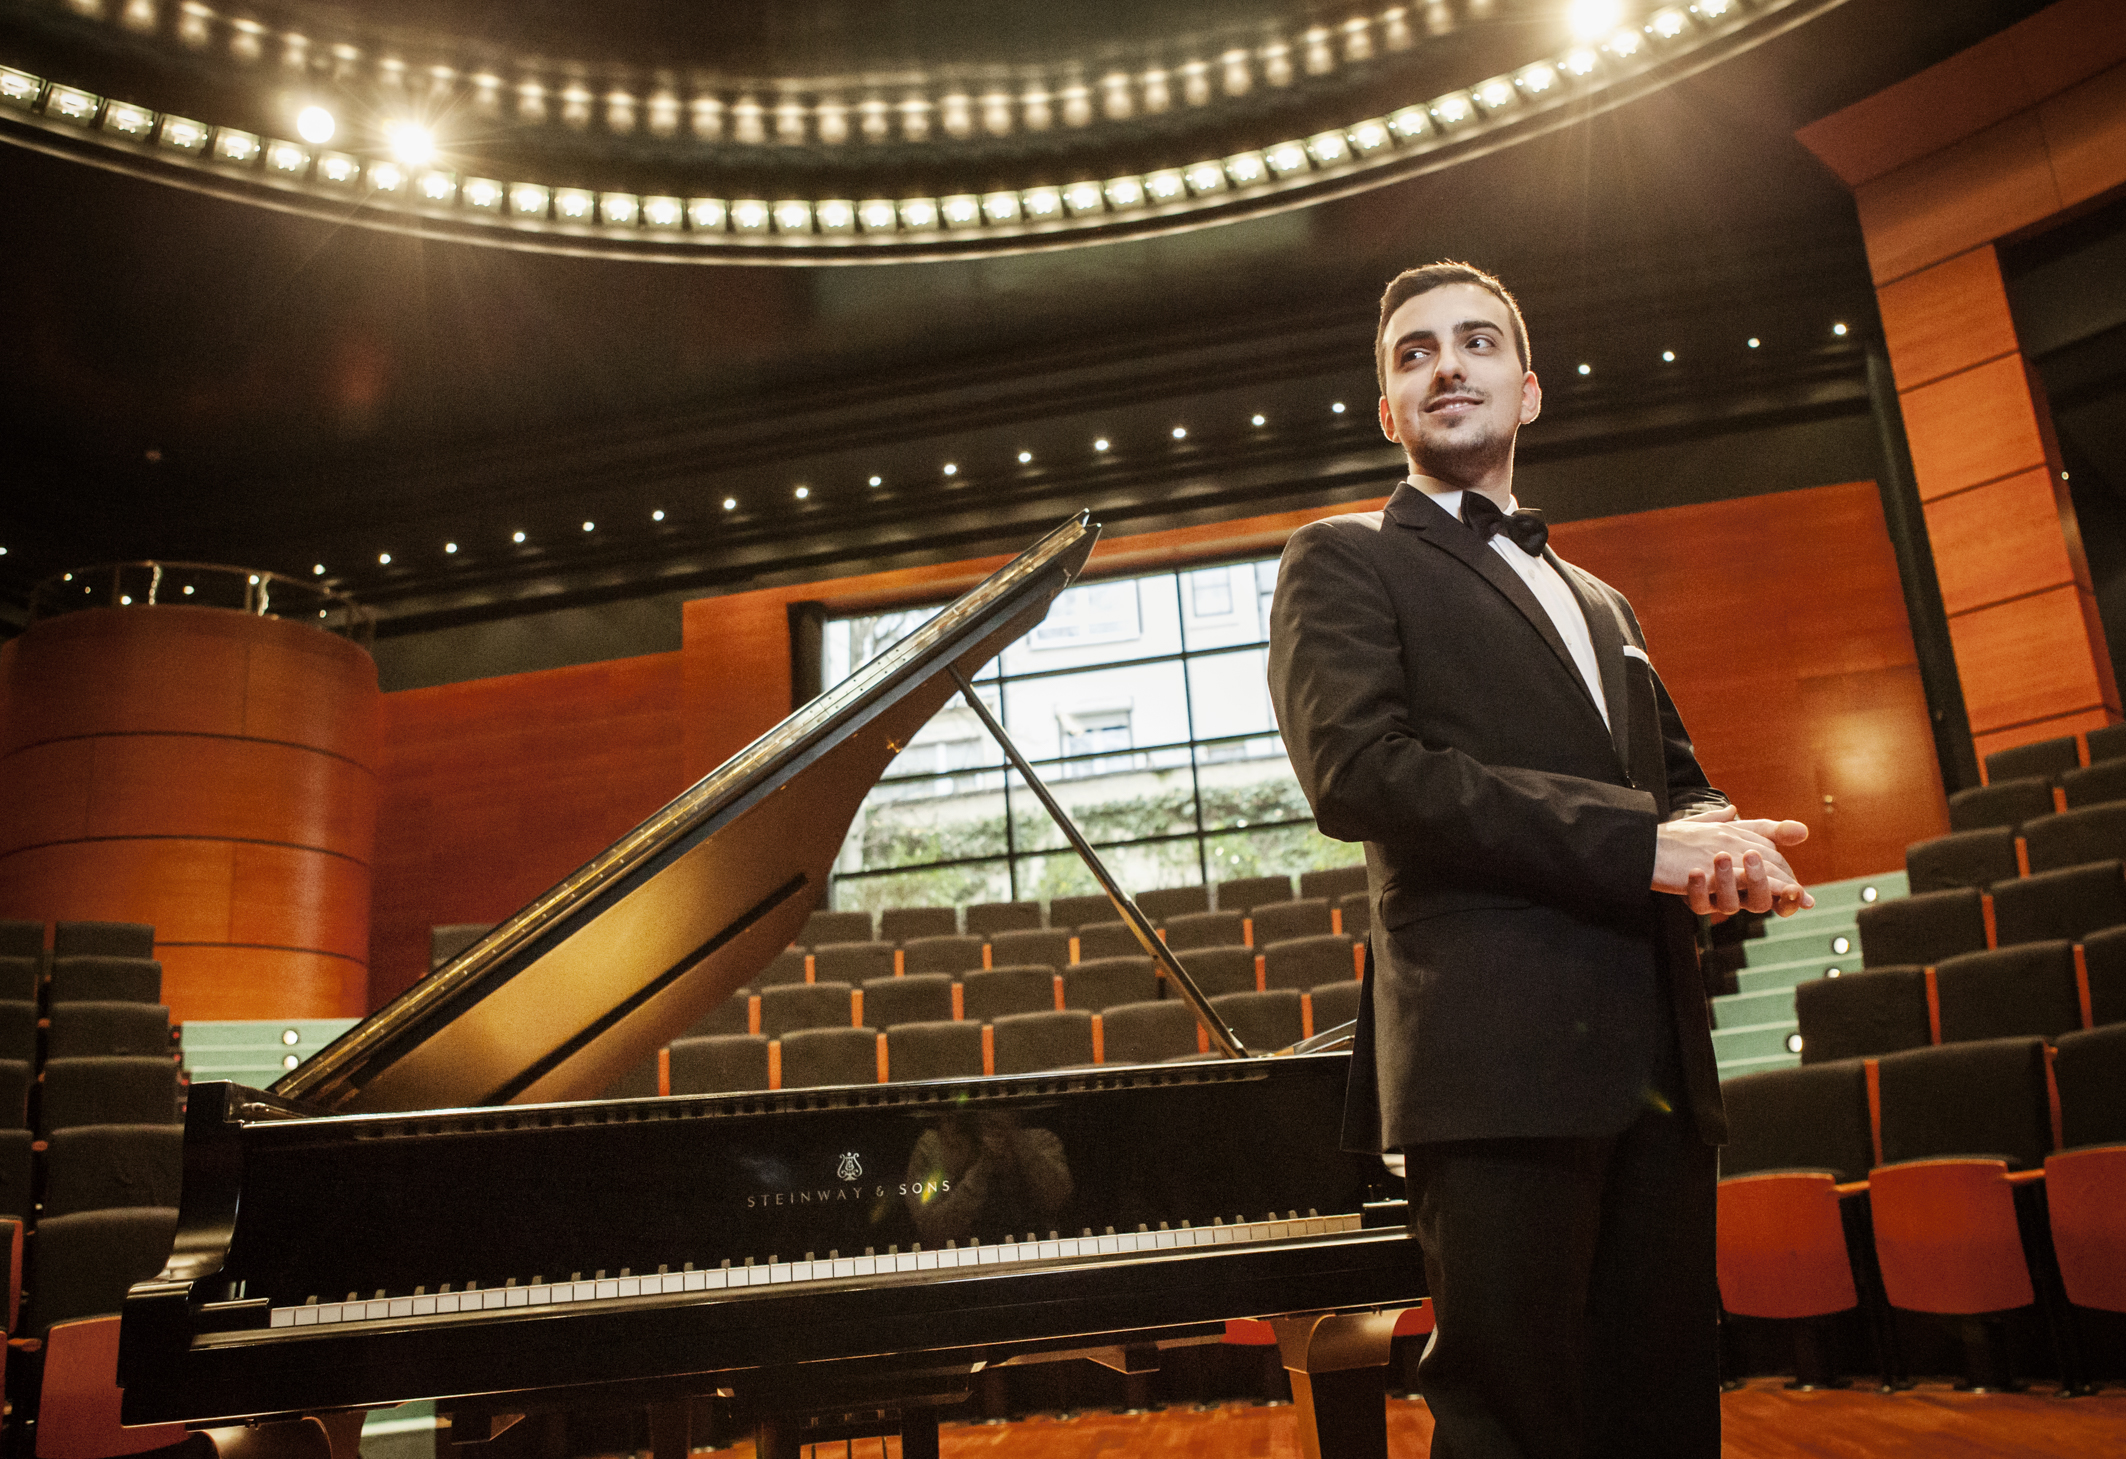 A small concert hall with empty seats. The pianist Ferro stands in front of a grand piano in the middle of the room.